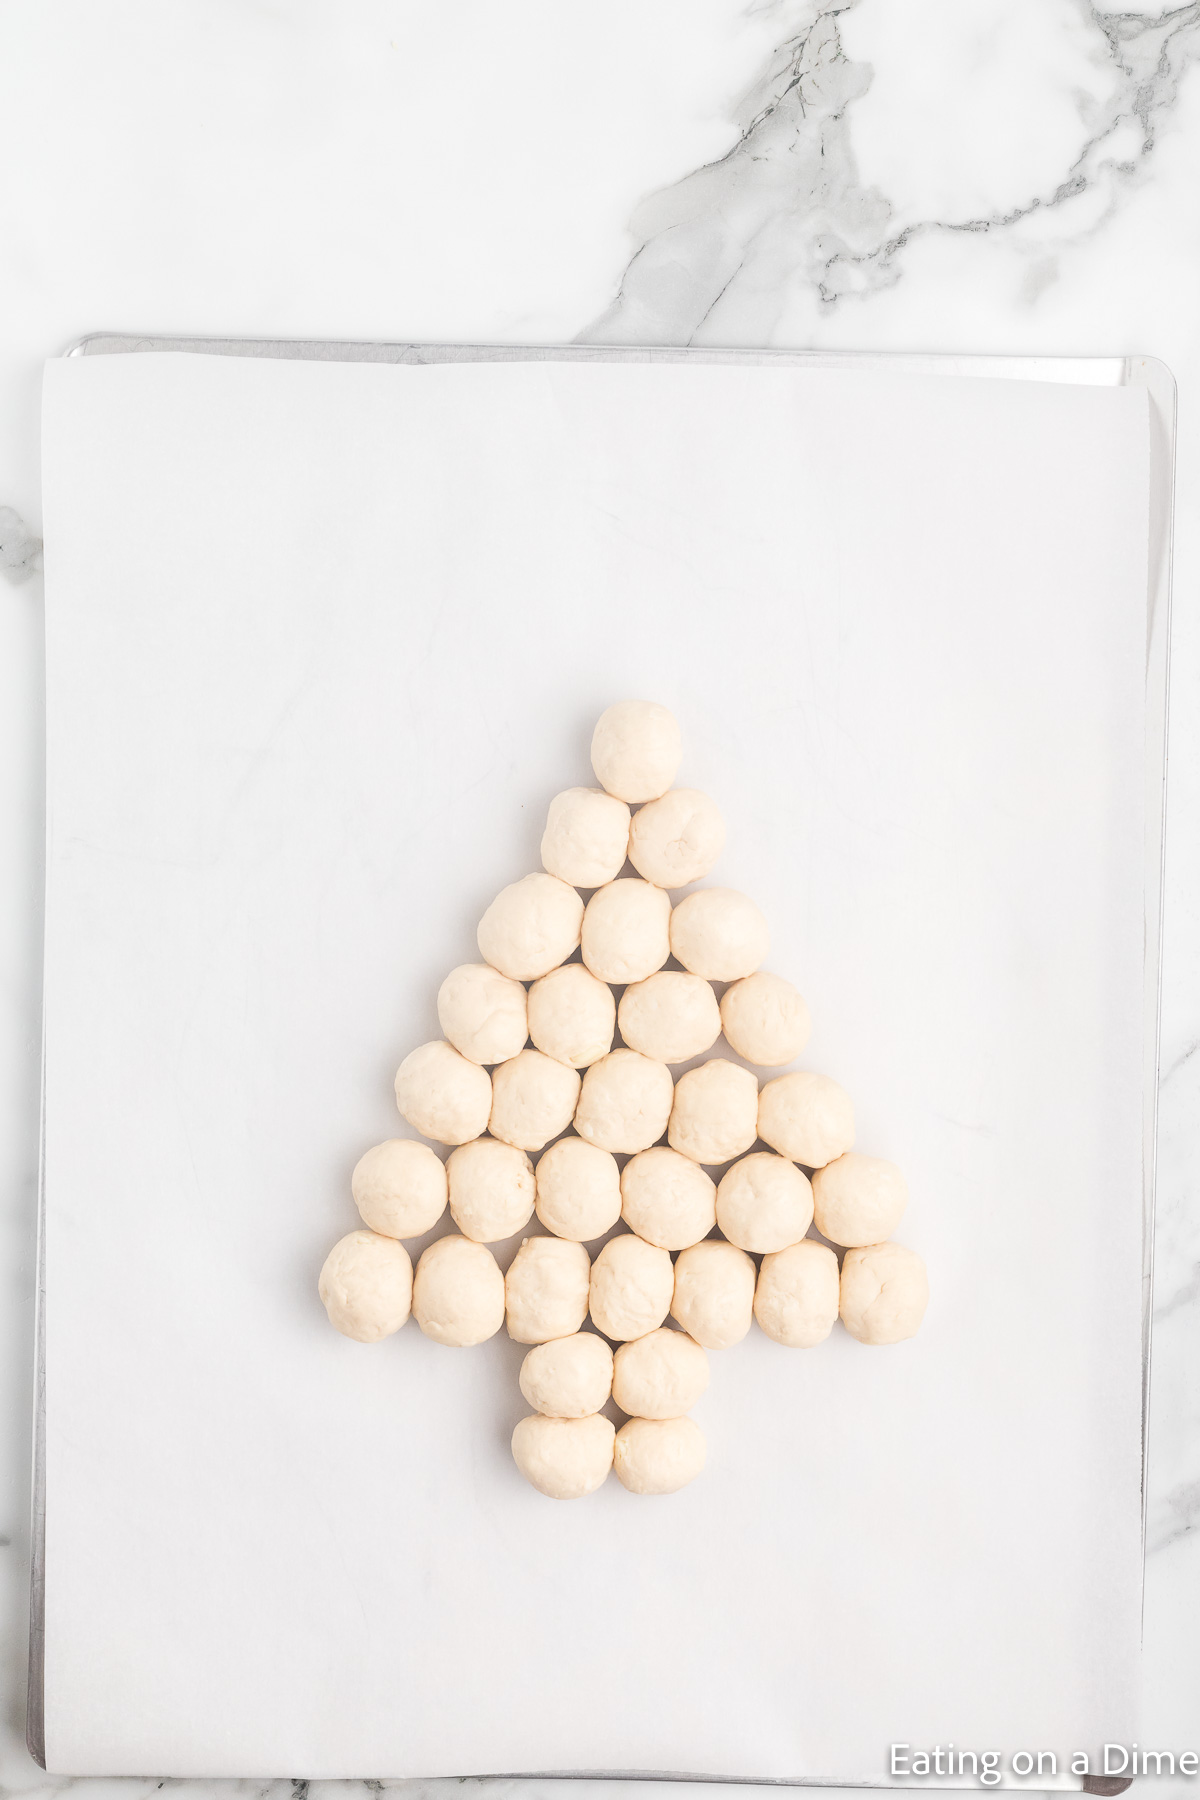 Placing the dough on a baking sheet in shape of a Christmas Tree